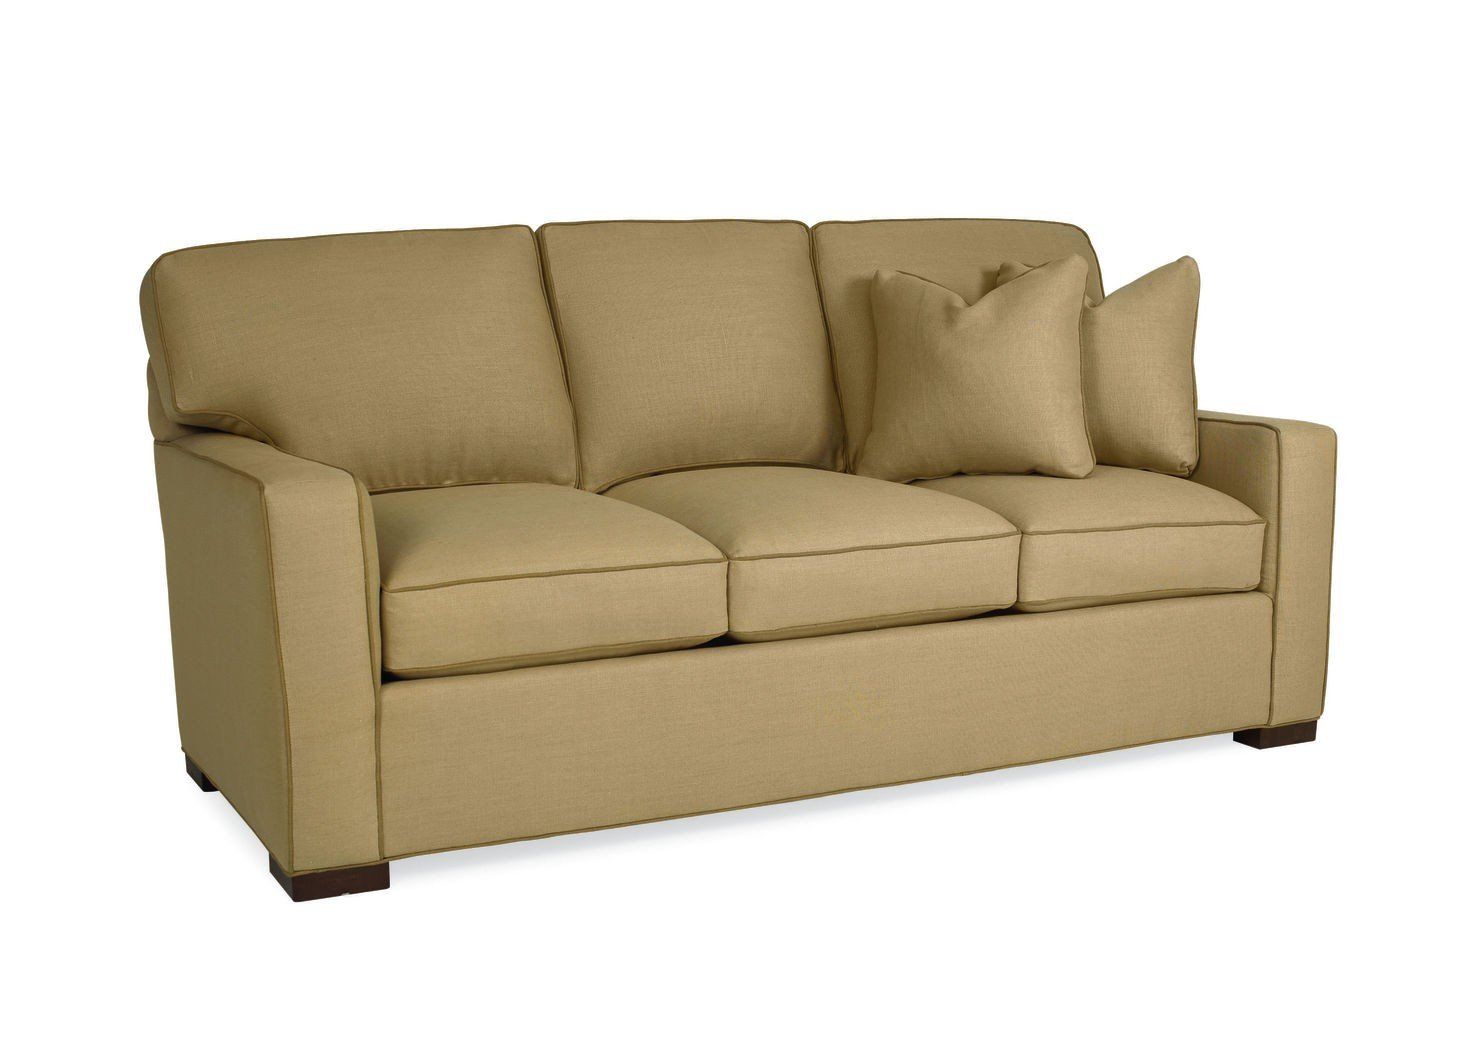 a tan couch with two pillows on it on a white background